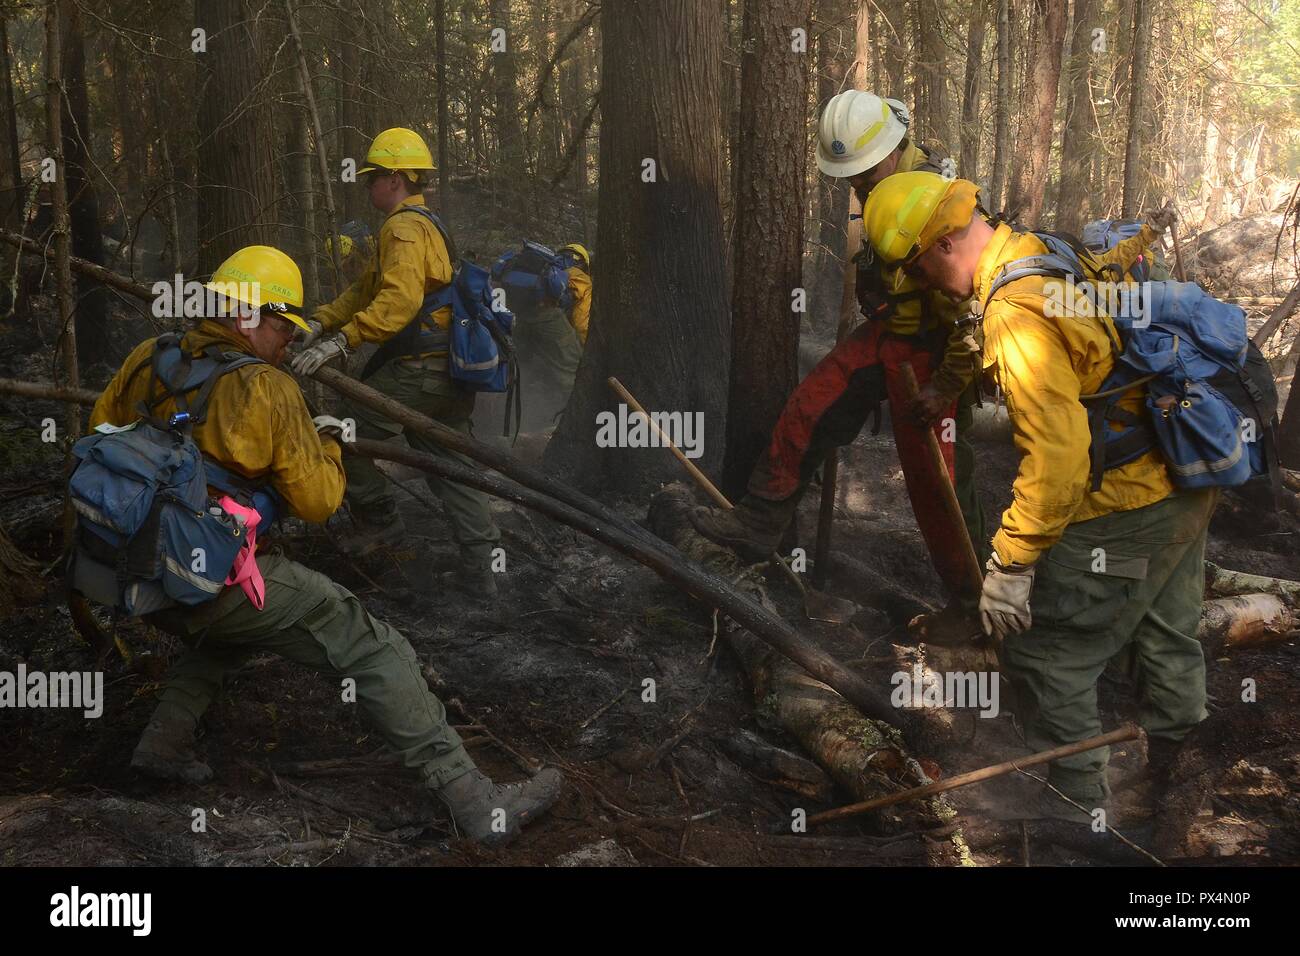 Airmen from the Washington Air National Guard, wearing yellow safety gear and blue backpacks, search for remaining embers in a forested area while fighting the Sheep Creek Fire, located in the Sheep Creek area near Northport, Washington, USA, image courtesy Technical sergeant Timothy Chacon and the Joint Forces Headquarters, Washington National Guard, August 6, 2018. () Stock Photo